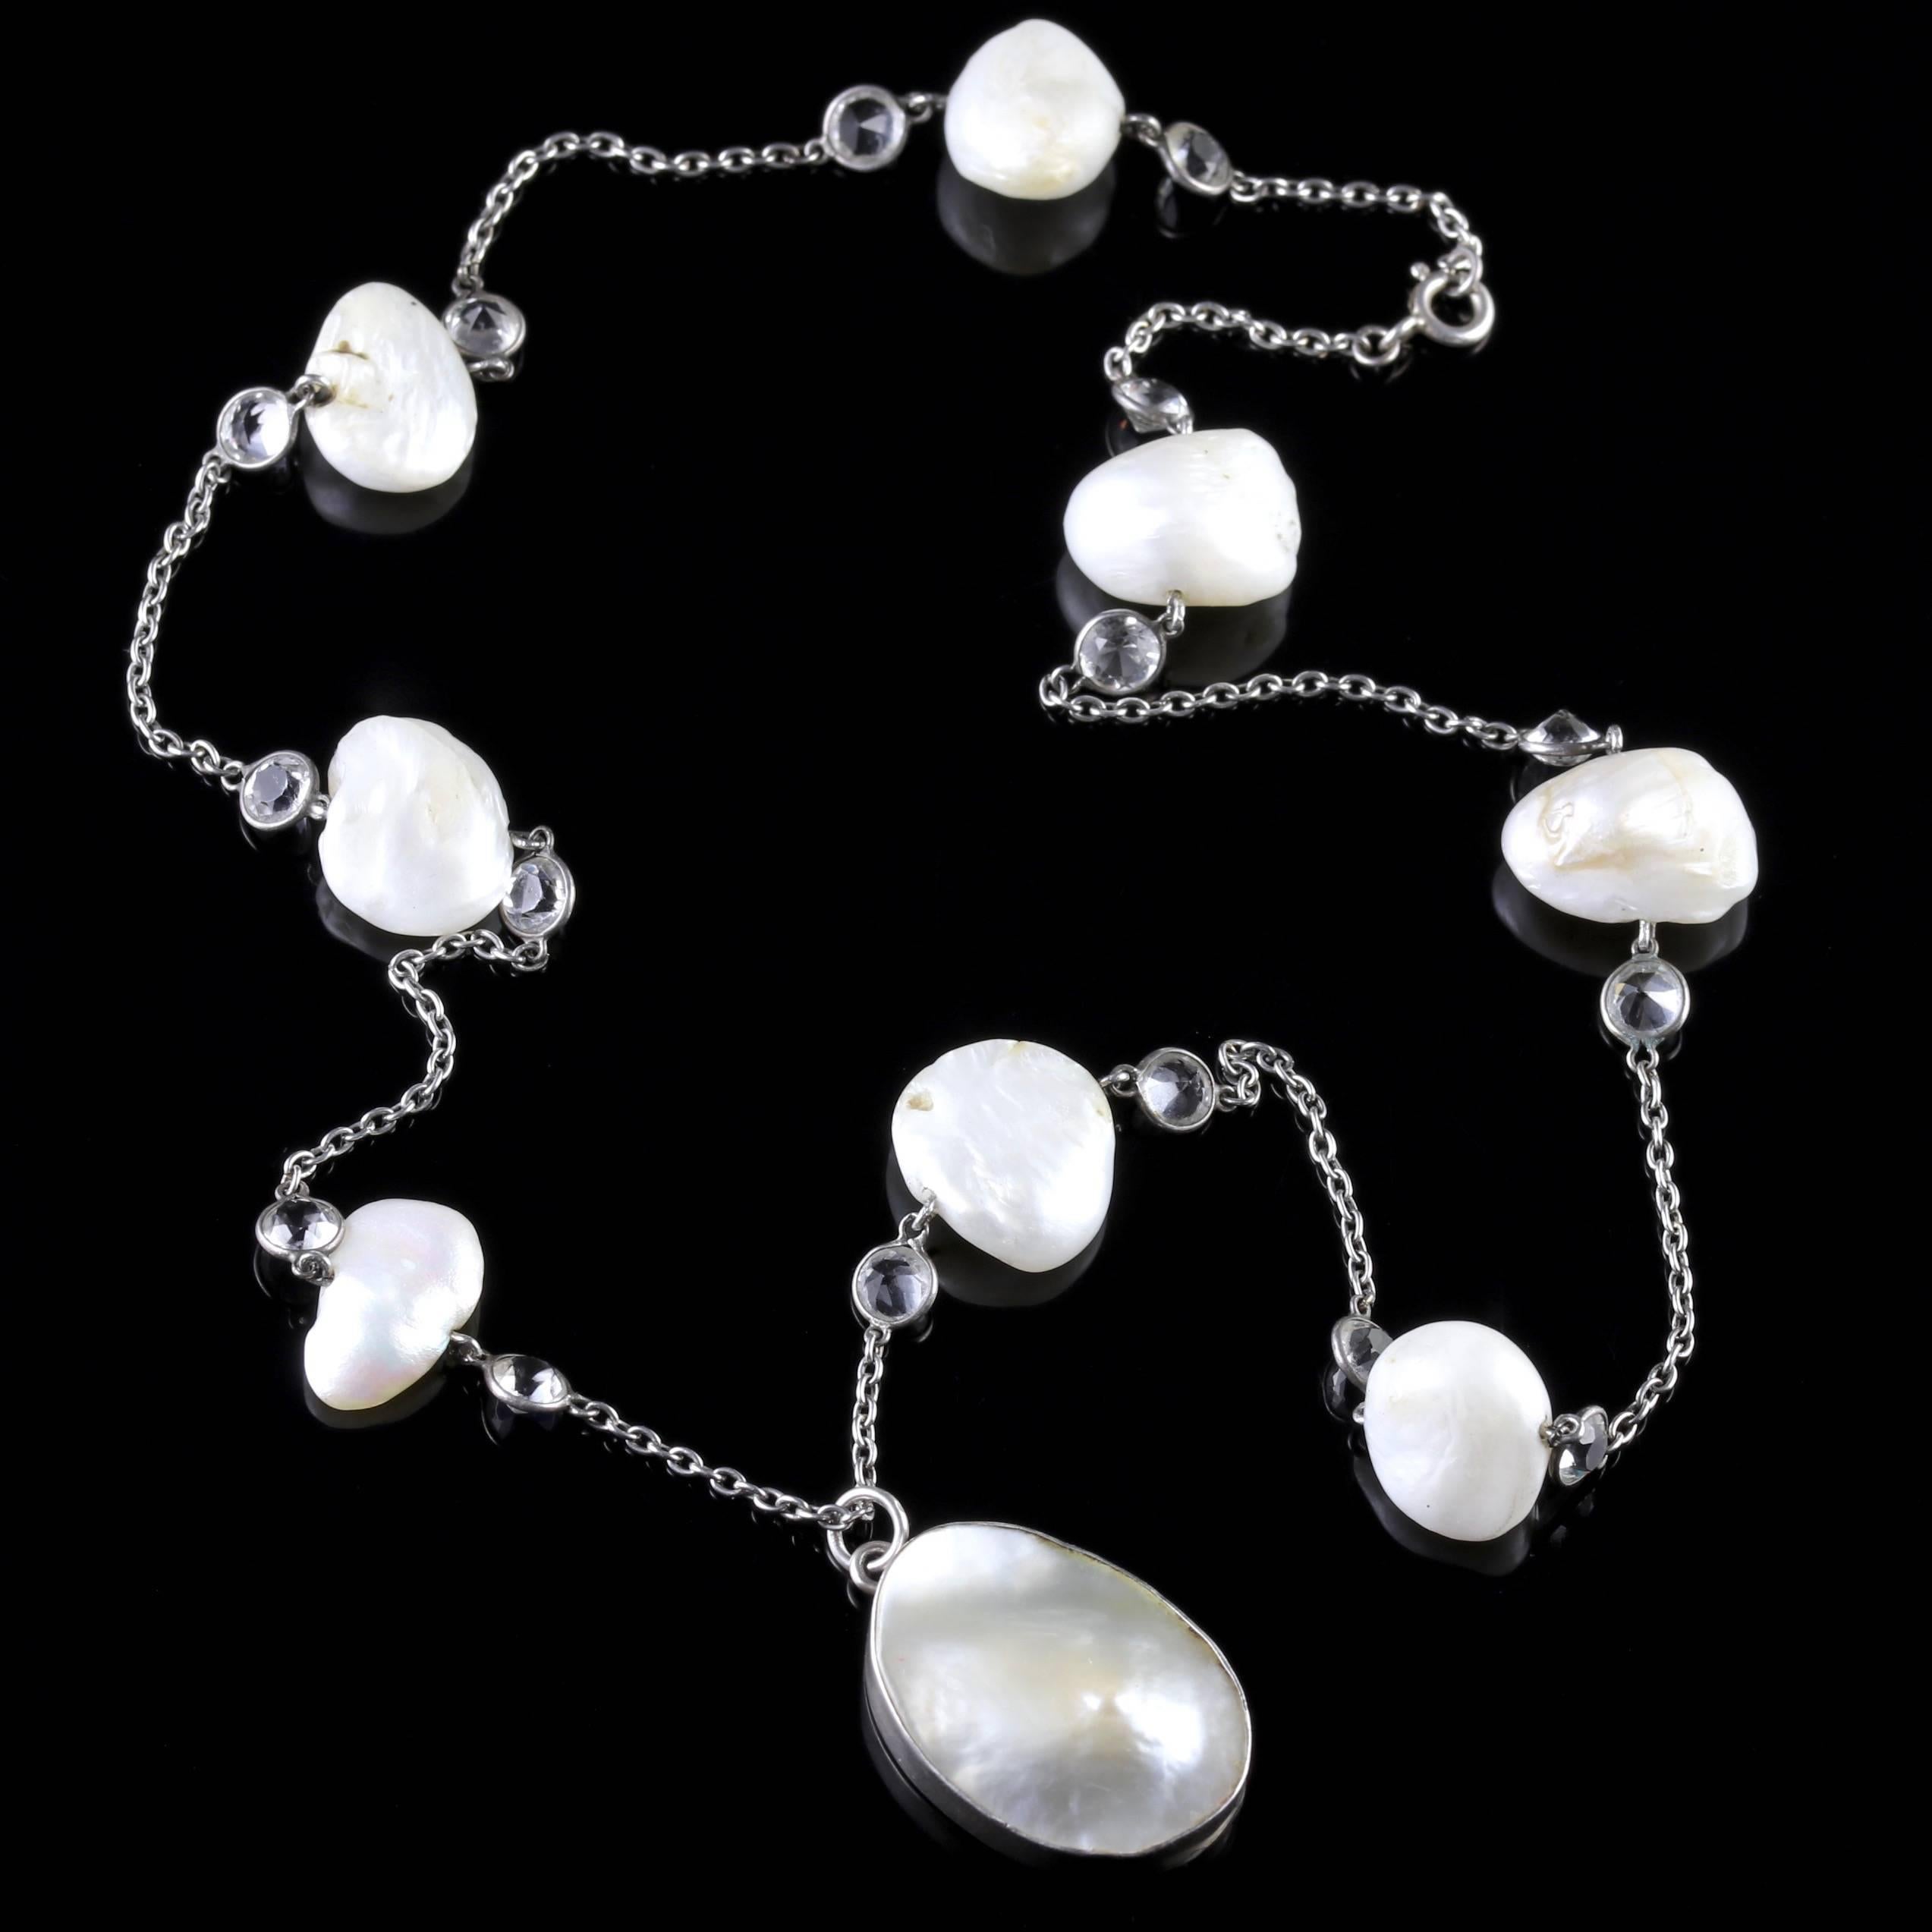 Antique Victorian Silver Blister Pearl Pendant Necklace, circa 1900 In Excellent Condition For Sale In Lancaster, Lancashire